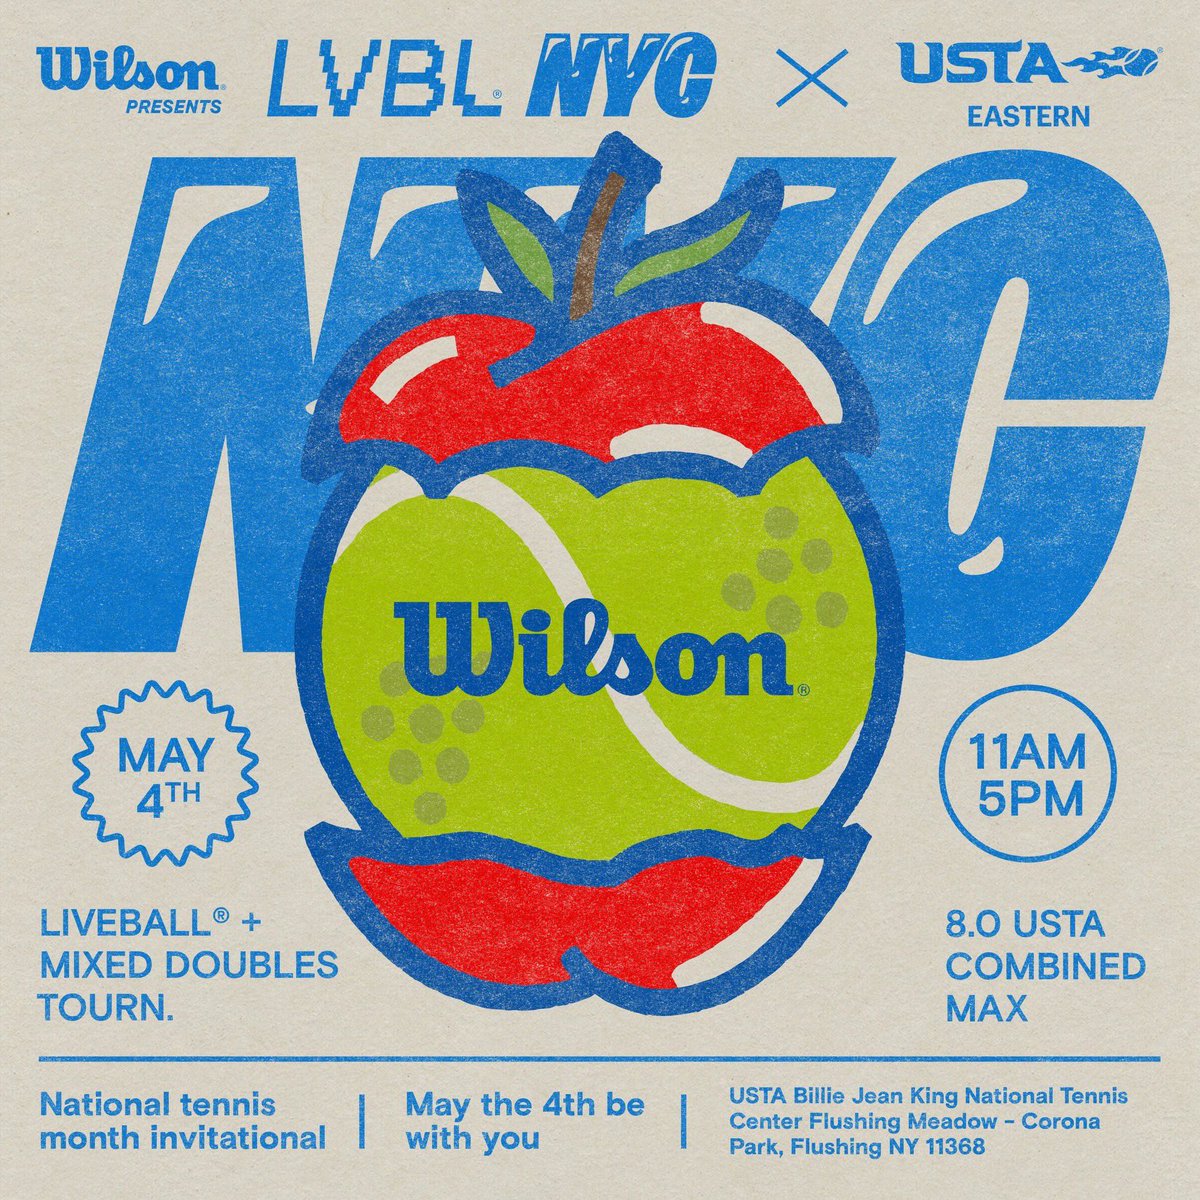 Join us this weekend at the LVBL NYC X @USTA Eastern: National Tennis Month Invitational. 🎾

Prizes on offer from @WilsonTennis and more! 👀

Learn more & sign up for free: lvbl.club/products/lvbl-…